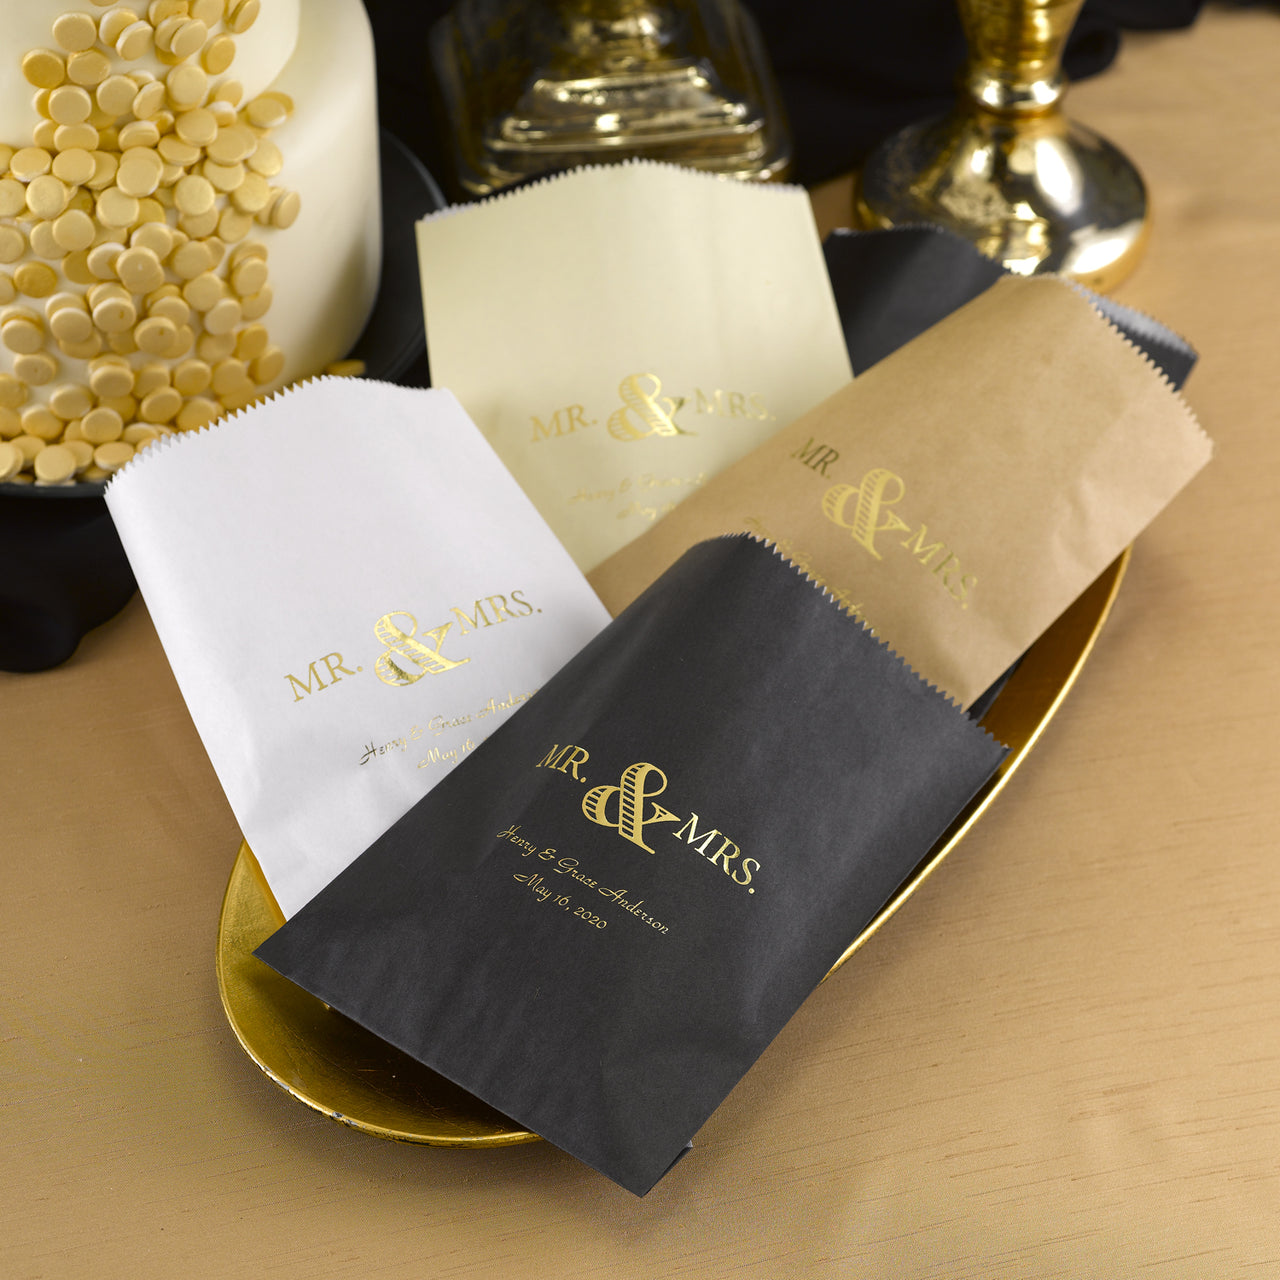 Personalized Mr. & Mrs. Treat Bags (Available in Multiple Colors) (Set of 50) - Main Image | My Wedding Favors